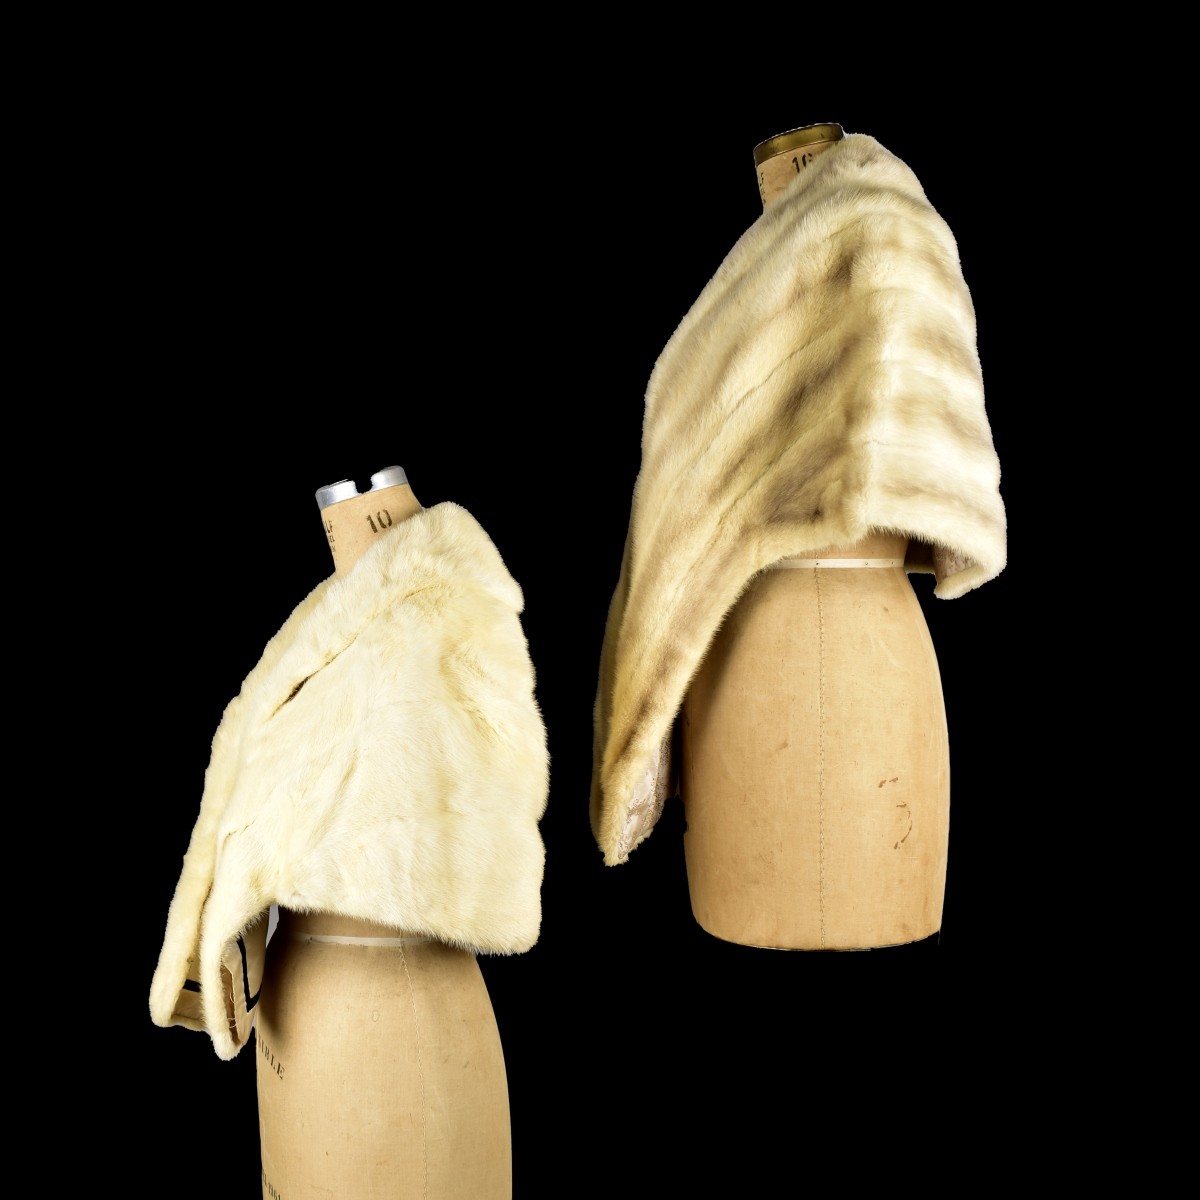 Two Mink Capes